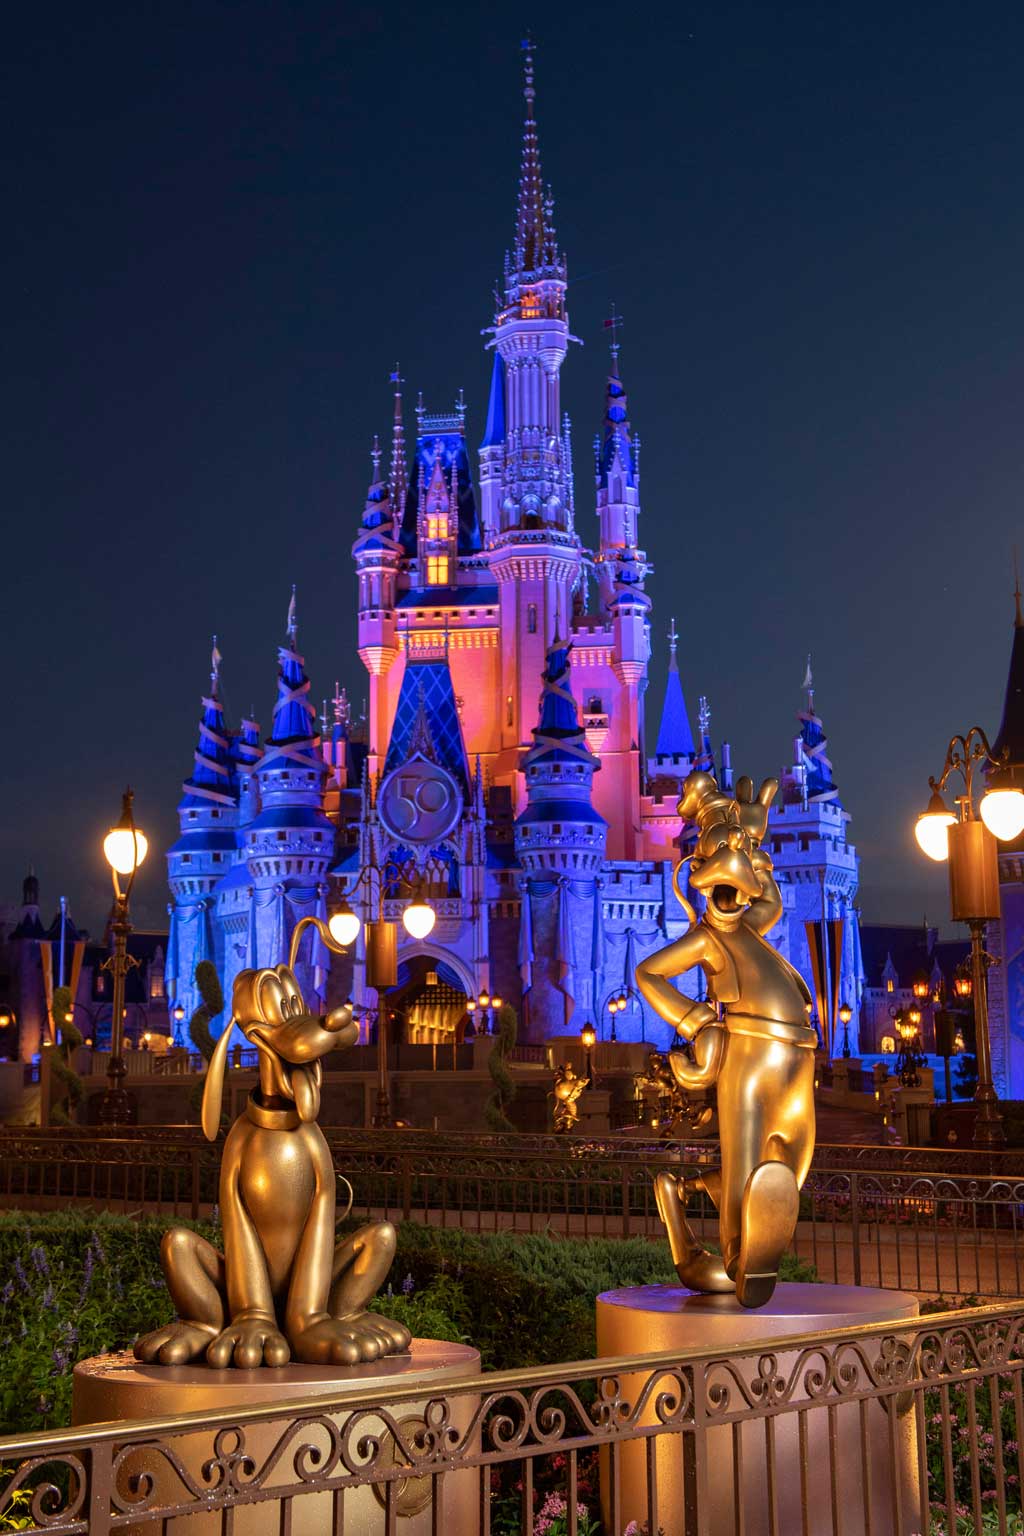 Pluto and Goofy at Magic Kingdom Park are two of the “Disney Fab 50” golden character sculptures appearing in all four Walt Disney World Resort theme parks in Lake Buena Vista, Fla., as part of “The World’s Most Magical Celebration,” beginning Oct. 1, 2021, in honor of the resort’s 50th anniversary. (David Roark, photographer)